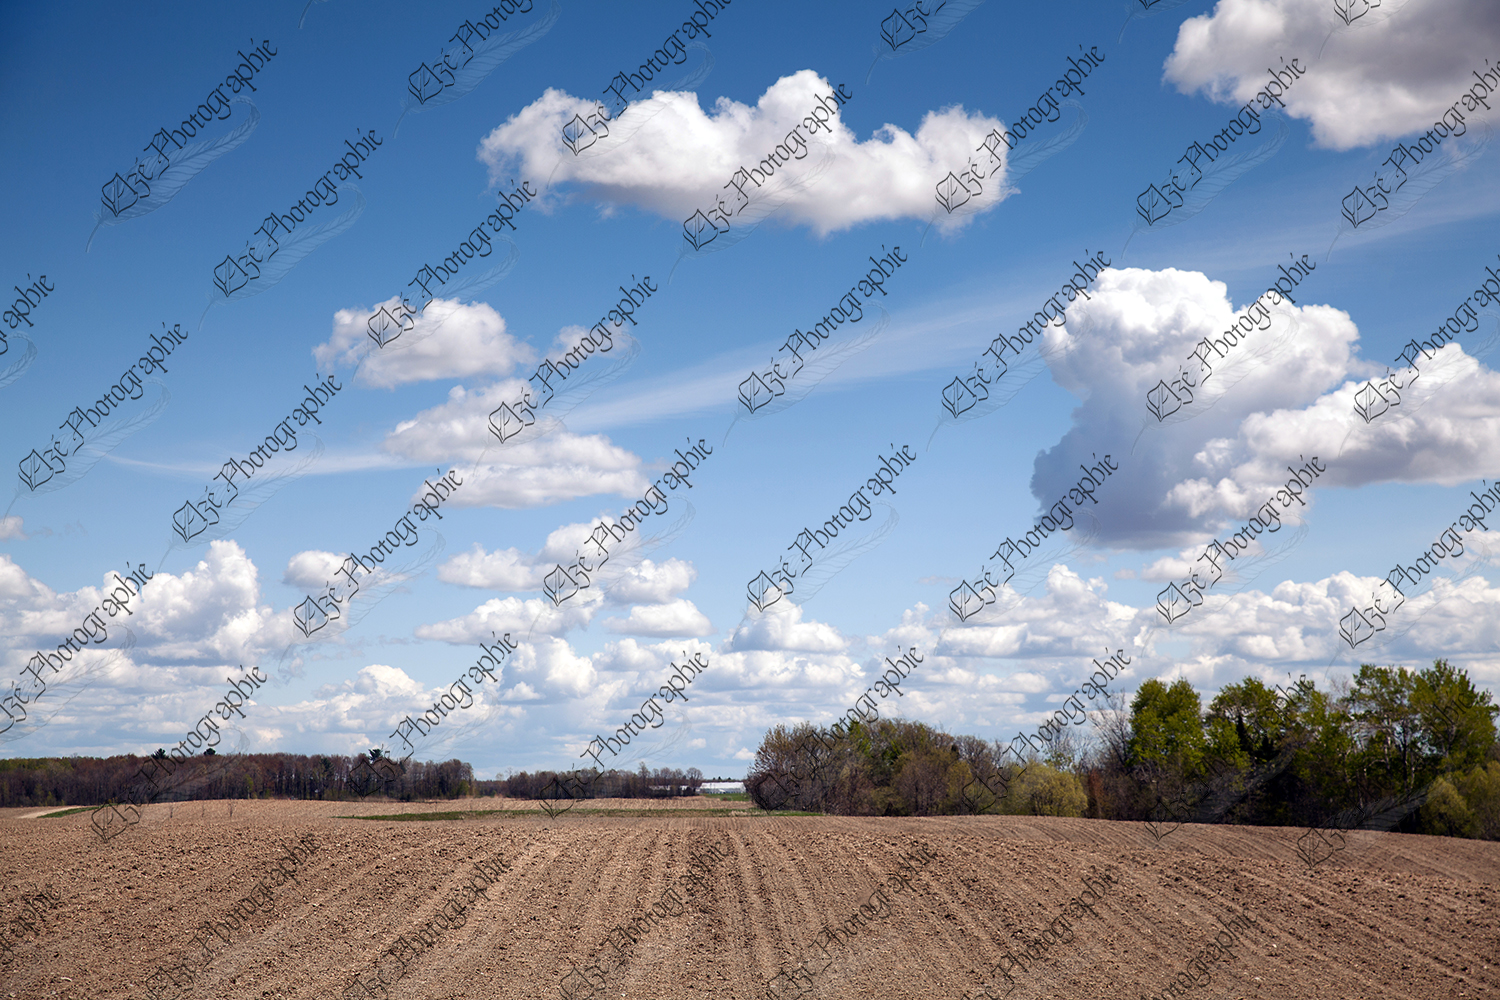 elze_photo_9961_terre_campagne_champ_freshly_sown_corn_field